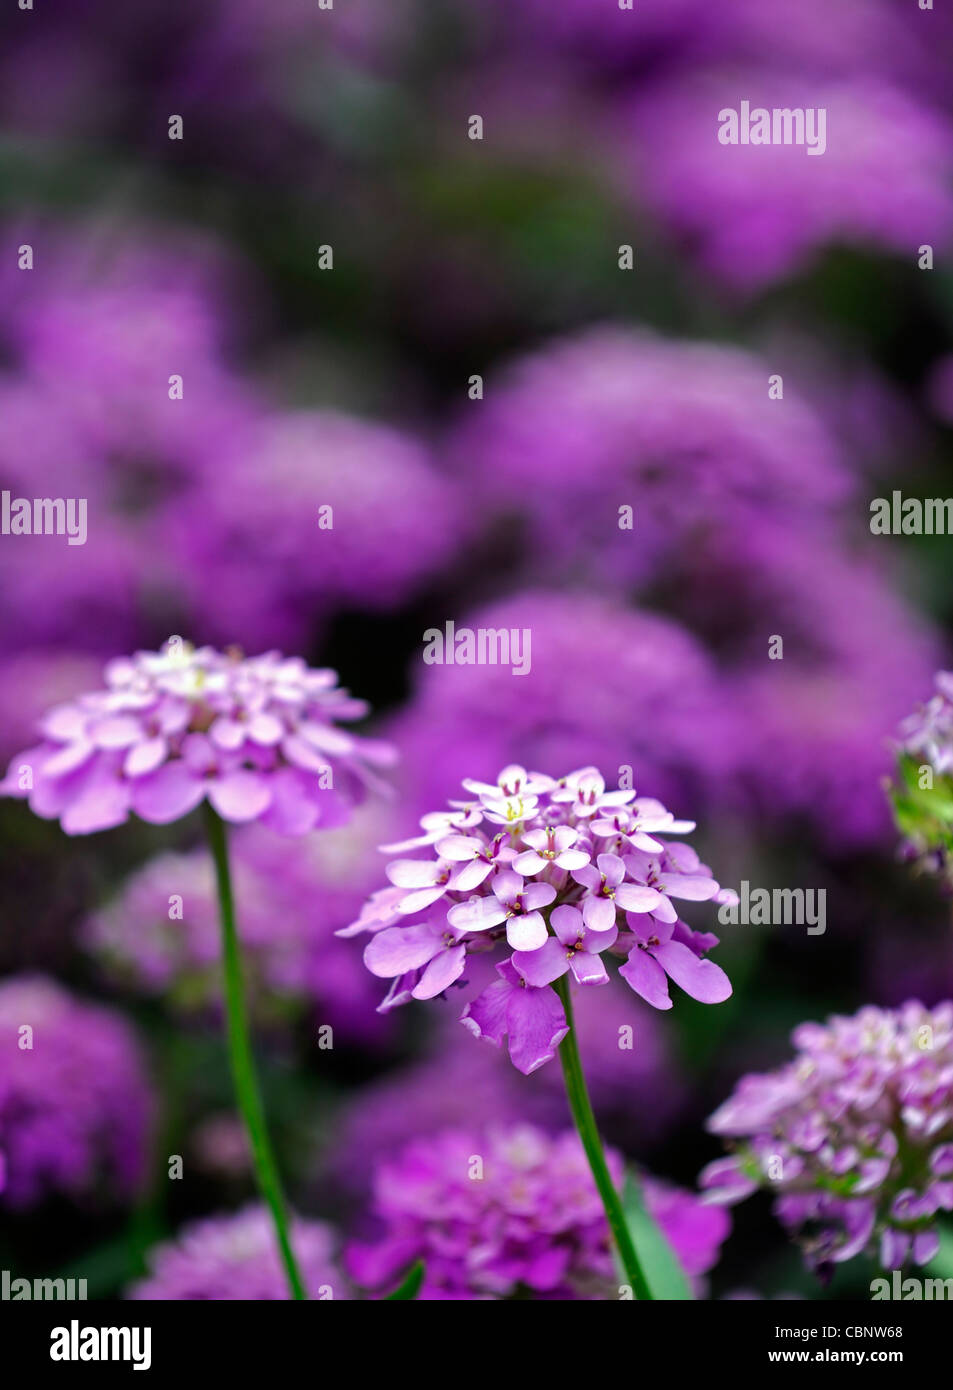 candytuft 'dwarf fairy mixed' Iberis tenoreana purple annual flower bloom blossom flowers blooms blossoms Stock Photo